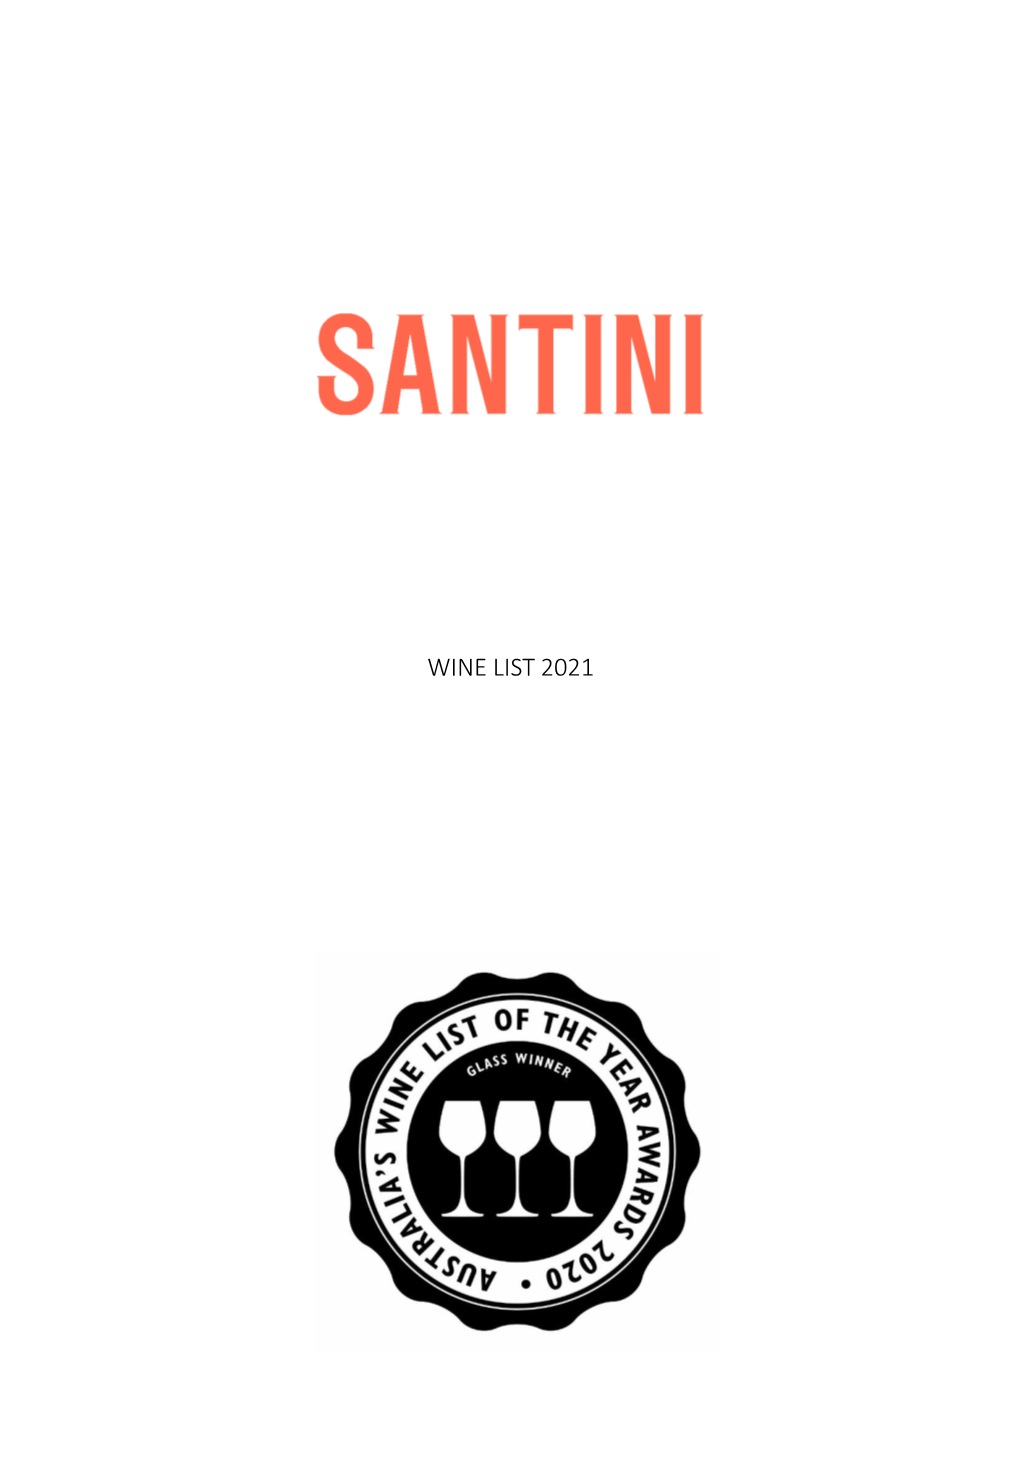 WINE LIST 2021 Welcome to Santini Bar and Grill